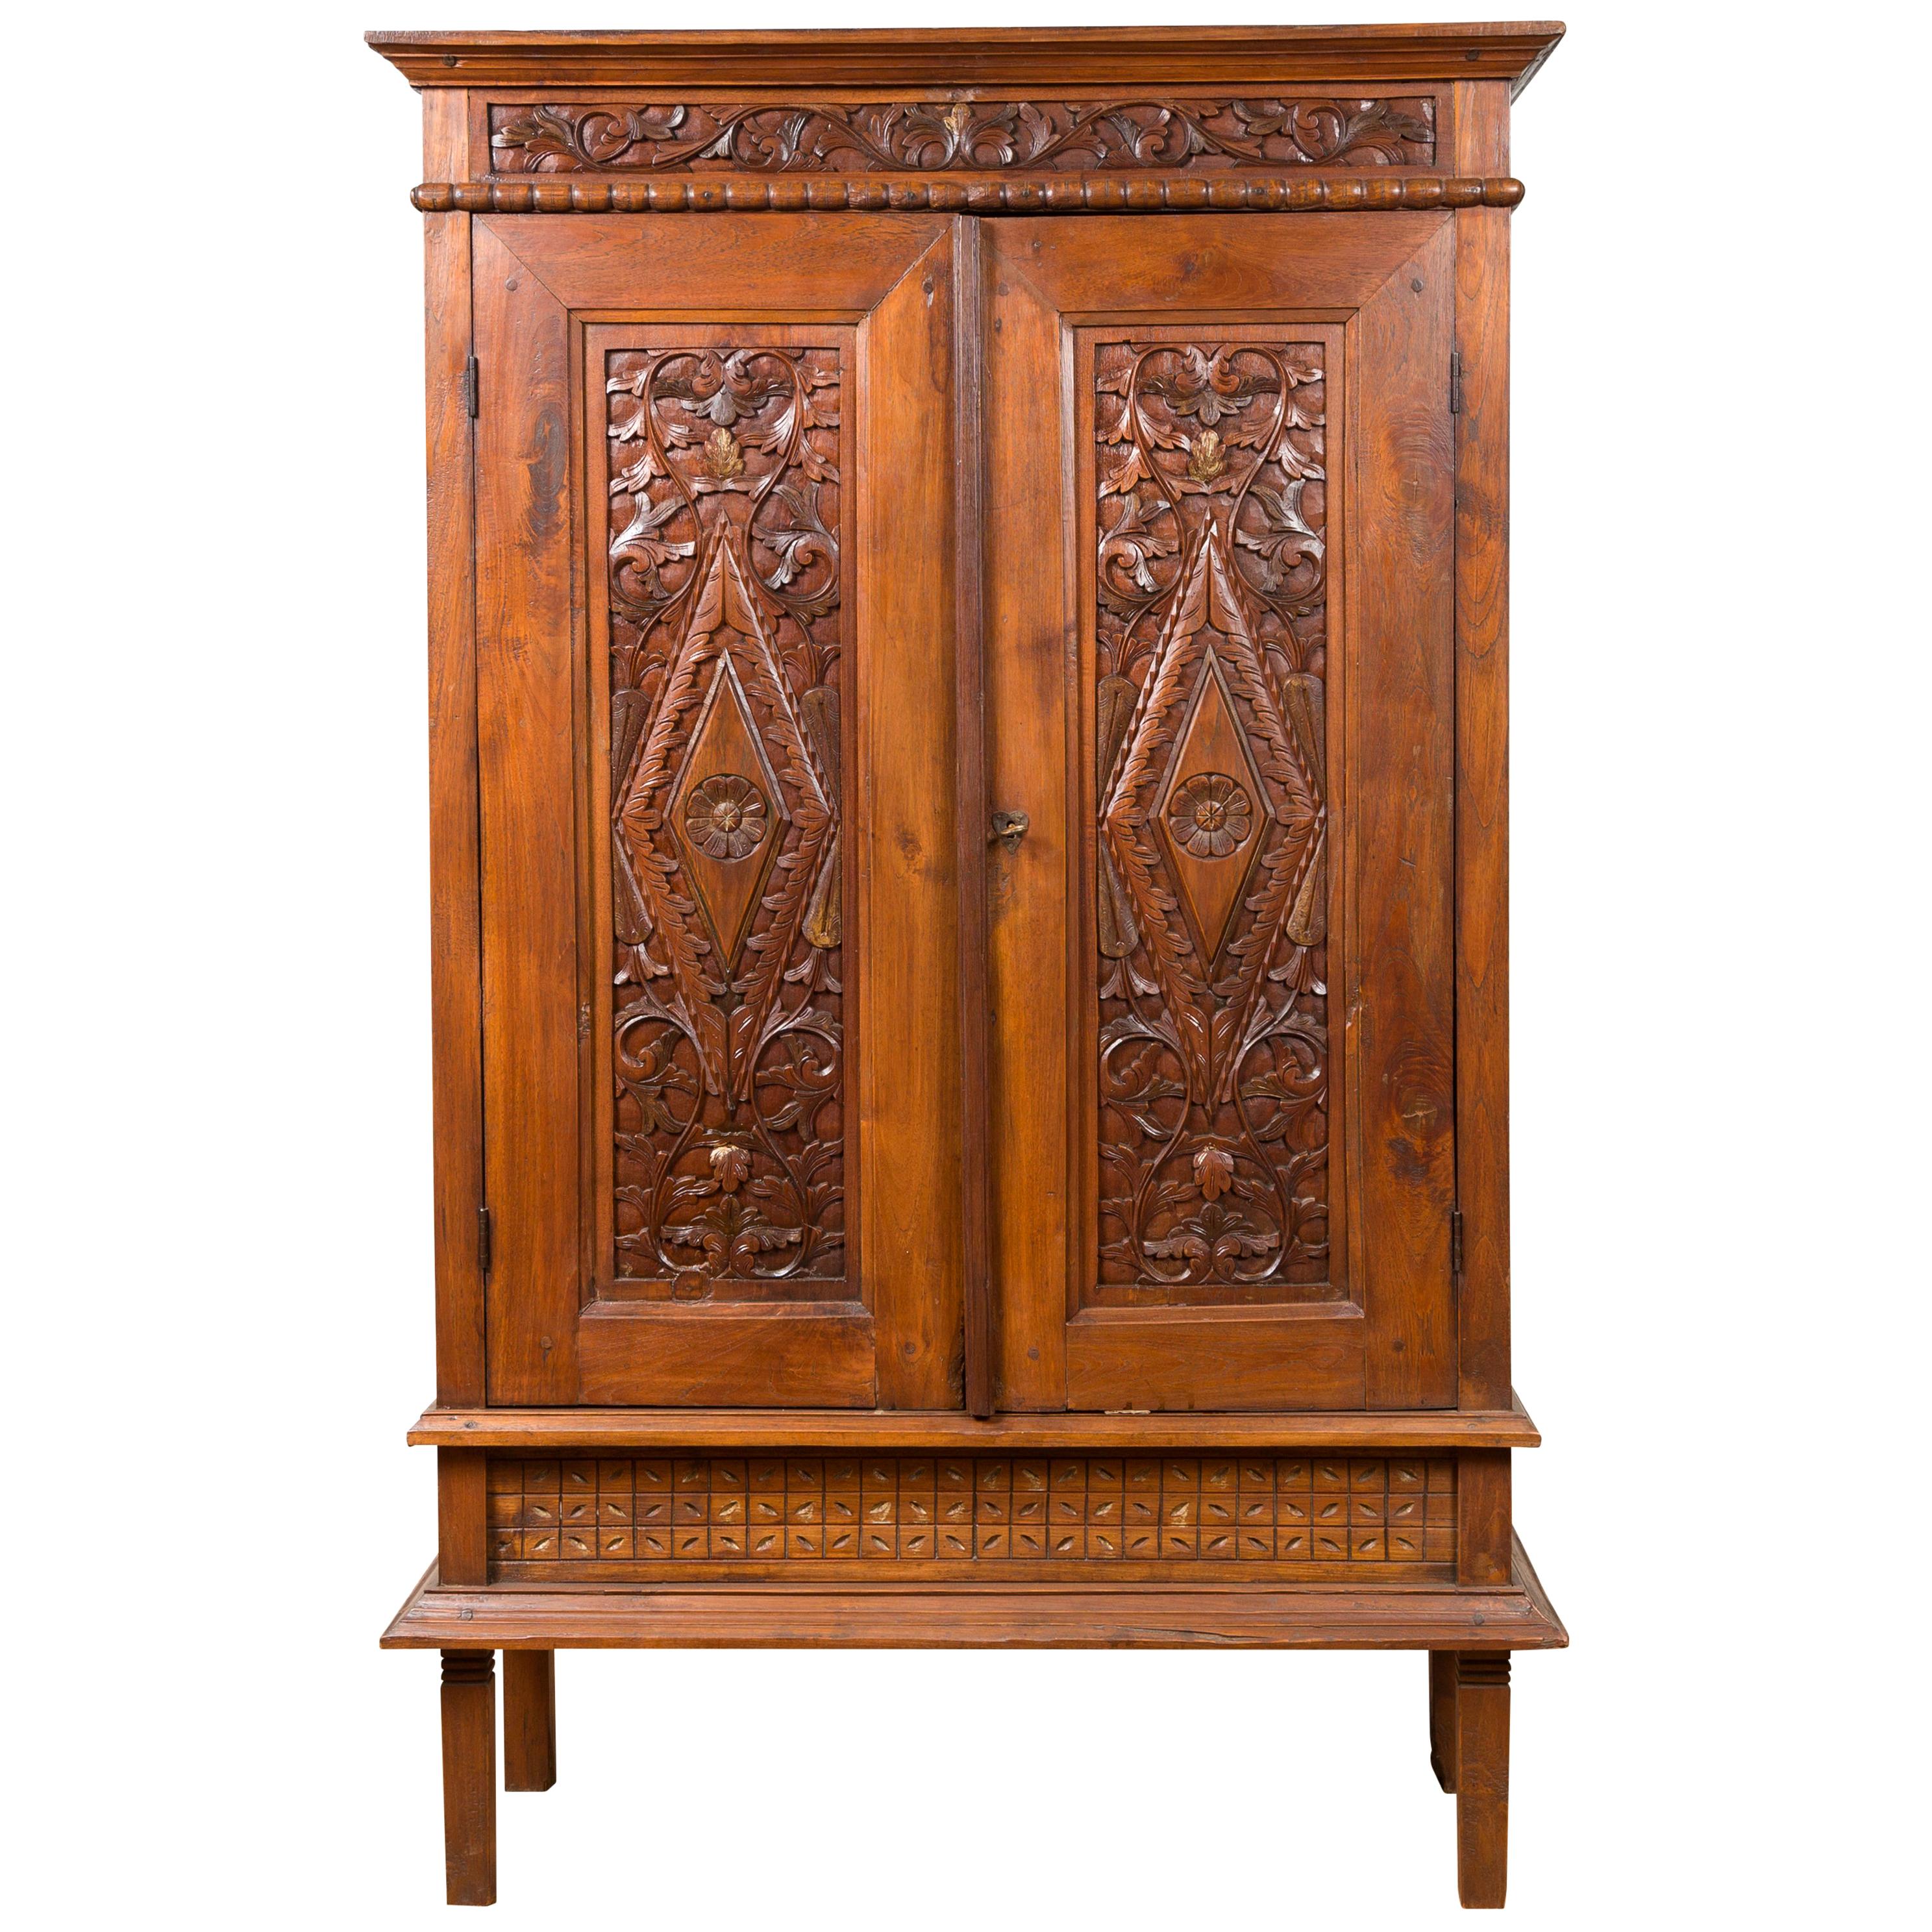 Antique Indonesian Cabinet with Carved Scrolling Foliage and Elongated Diamonds